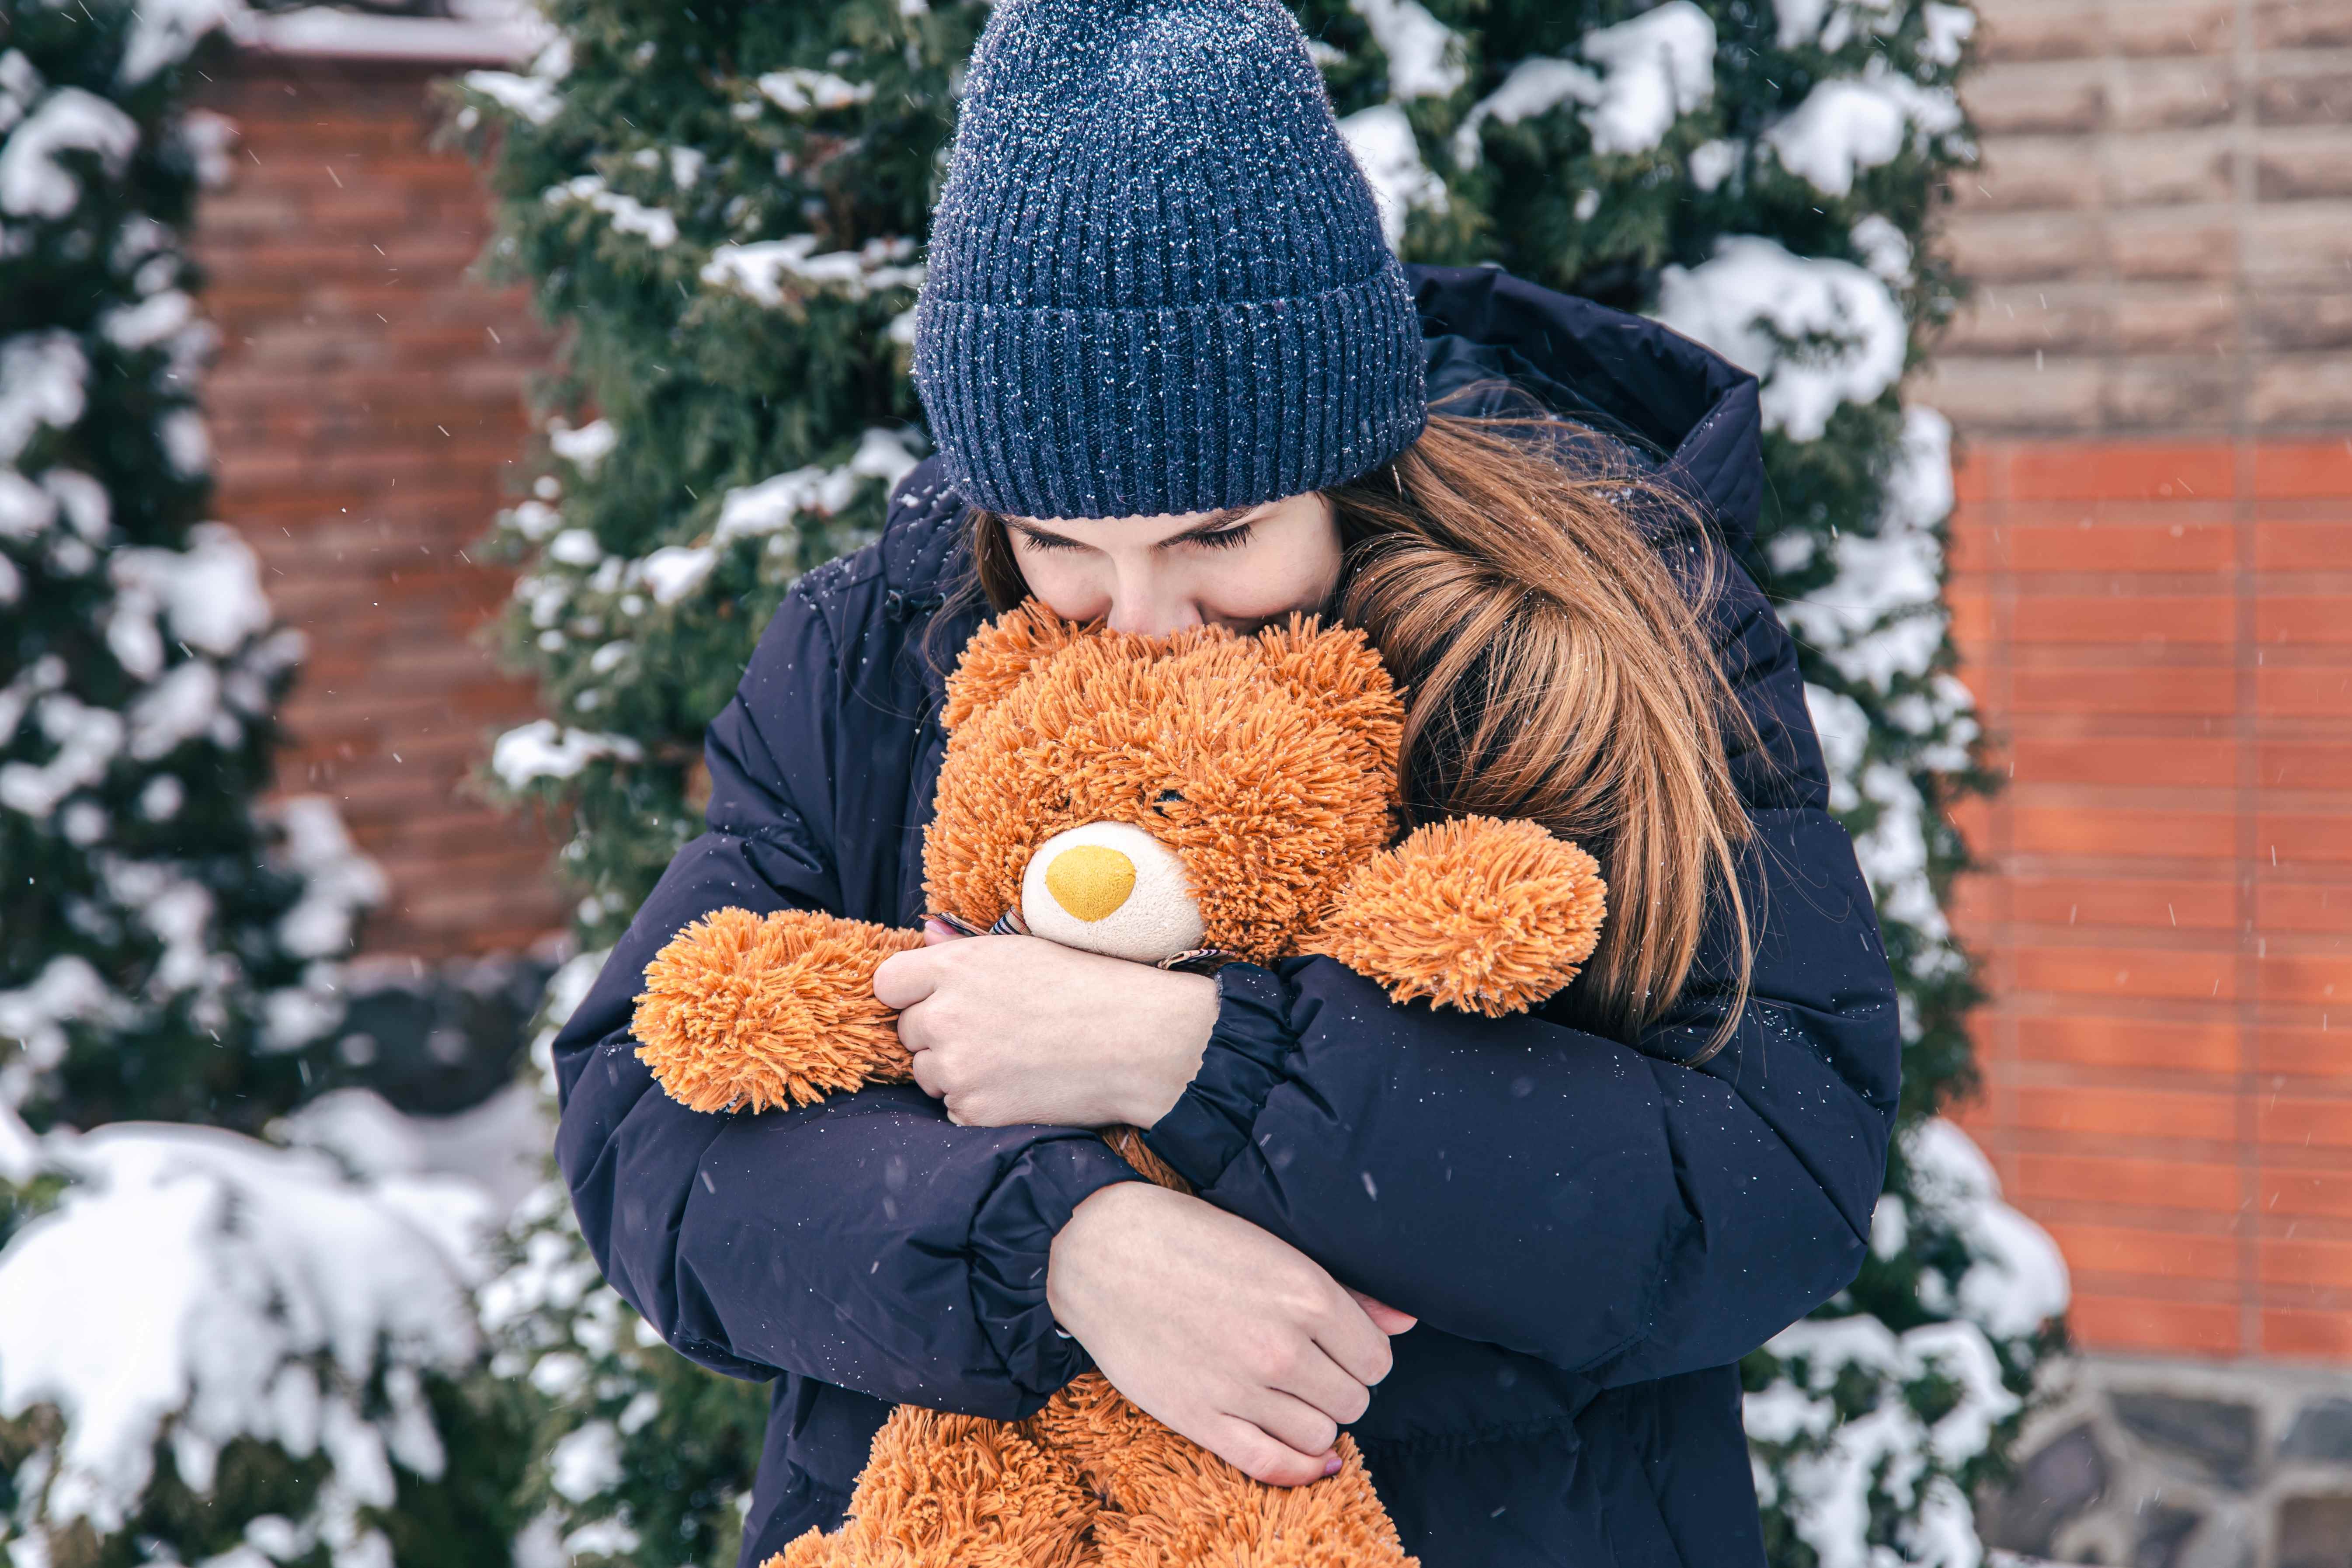 A woman cuddles the sweet teddy bear her boyfriend gave her for Valentine’s Day.